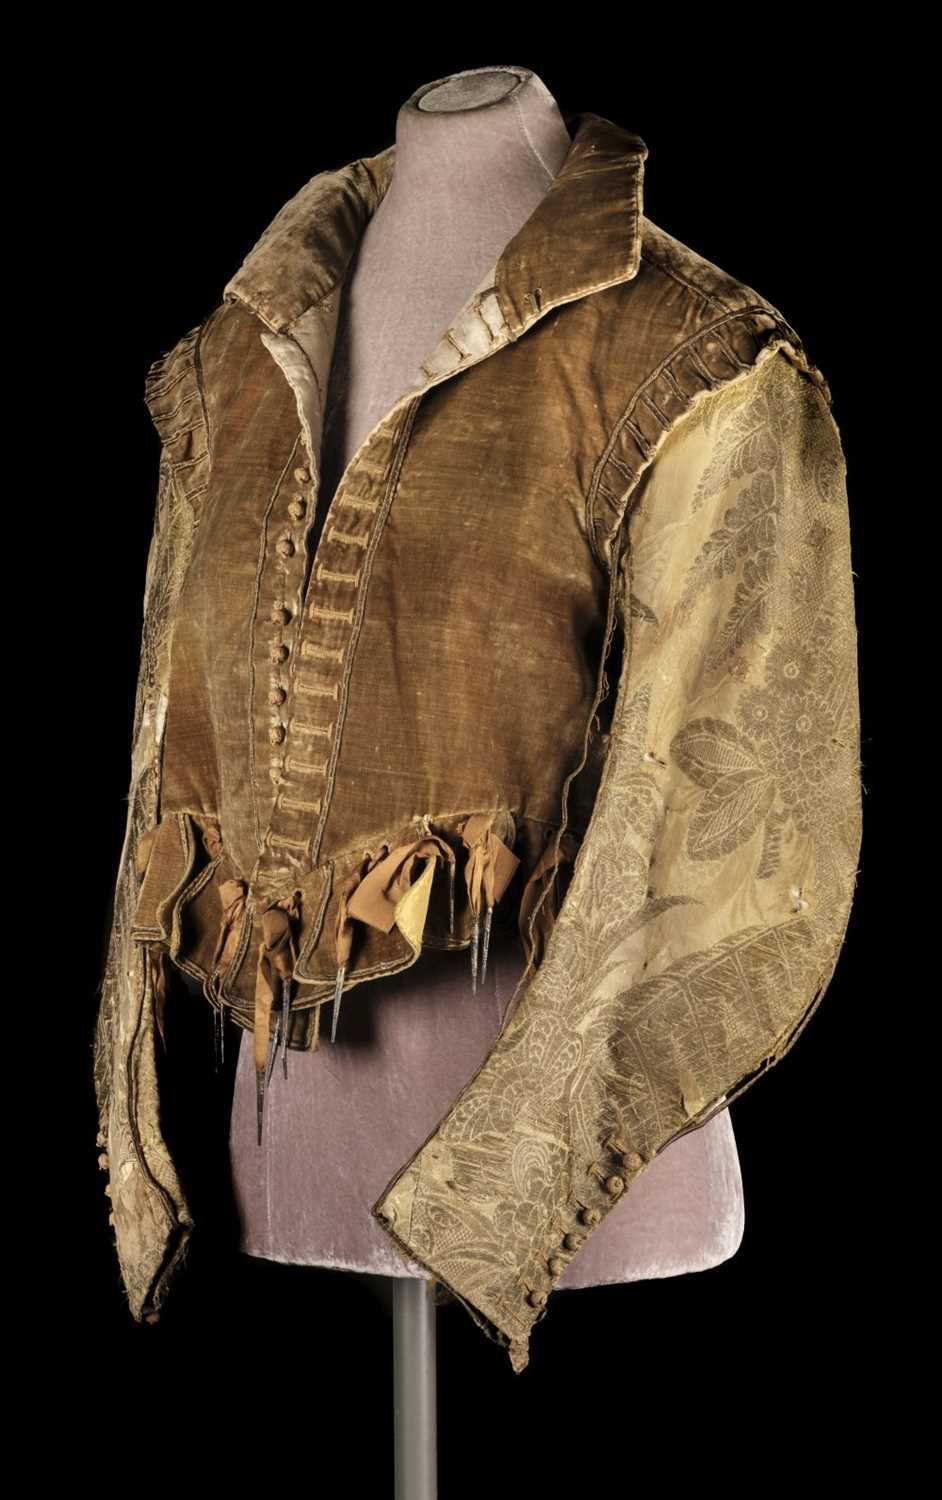 227 - Clothing. A European doublet, probably 1580-1600 [and later]